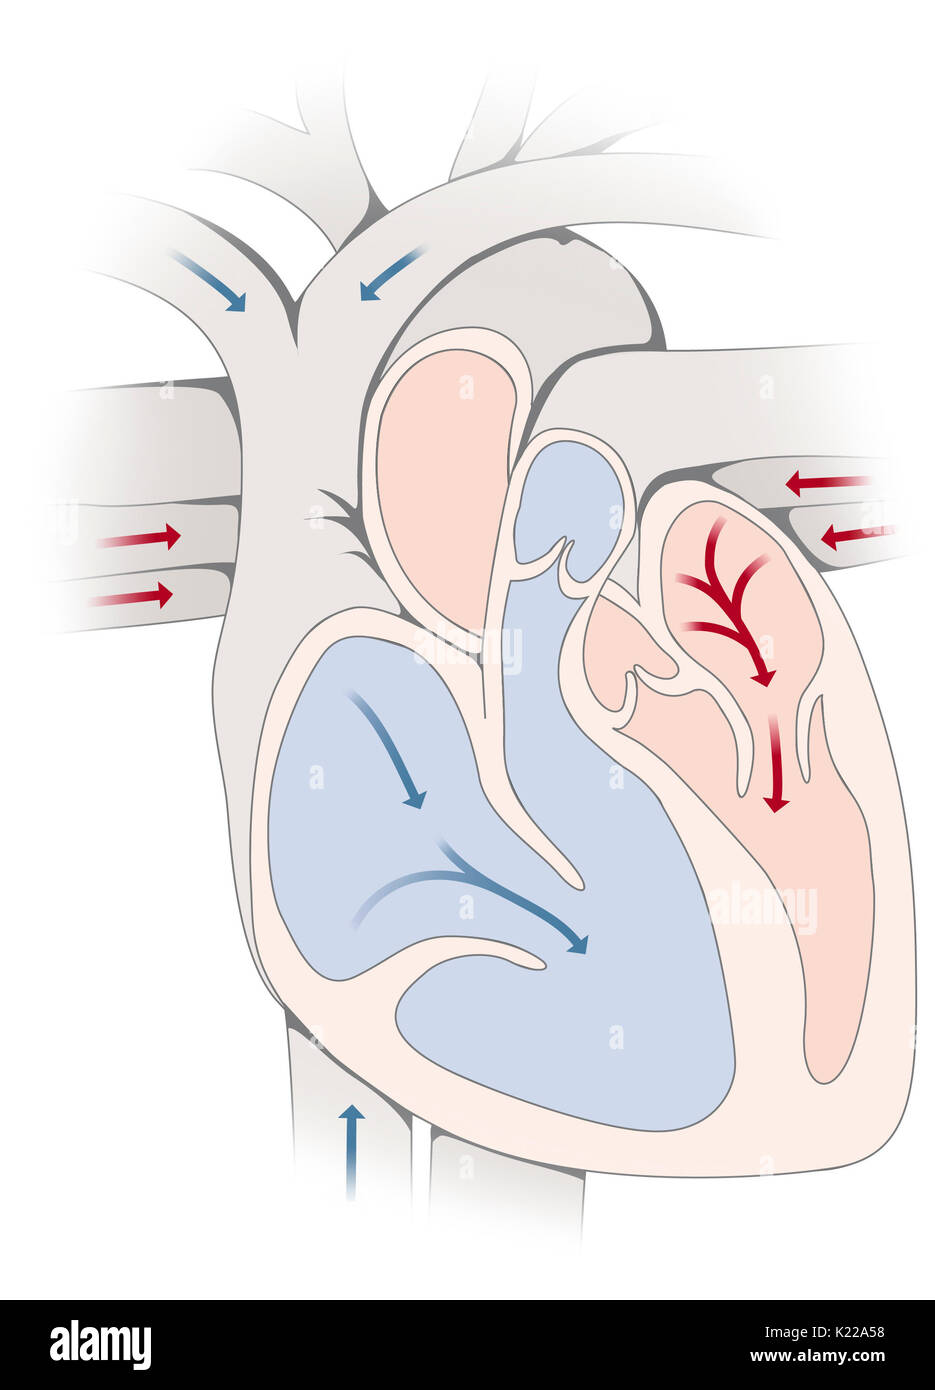 Diastole is the period of the cardiac cycle during which the myocardium relaxes, permitting the auricles and then the ventricles to fill with blood. Stock Photo